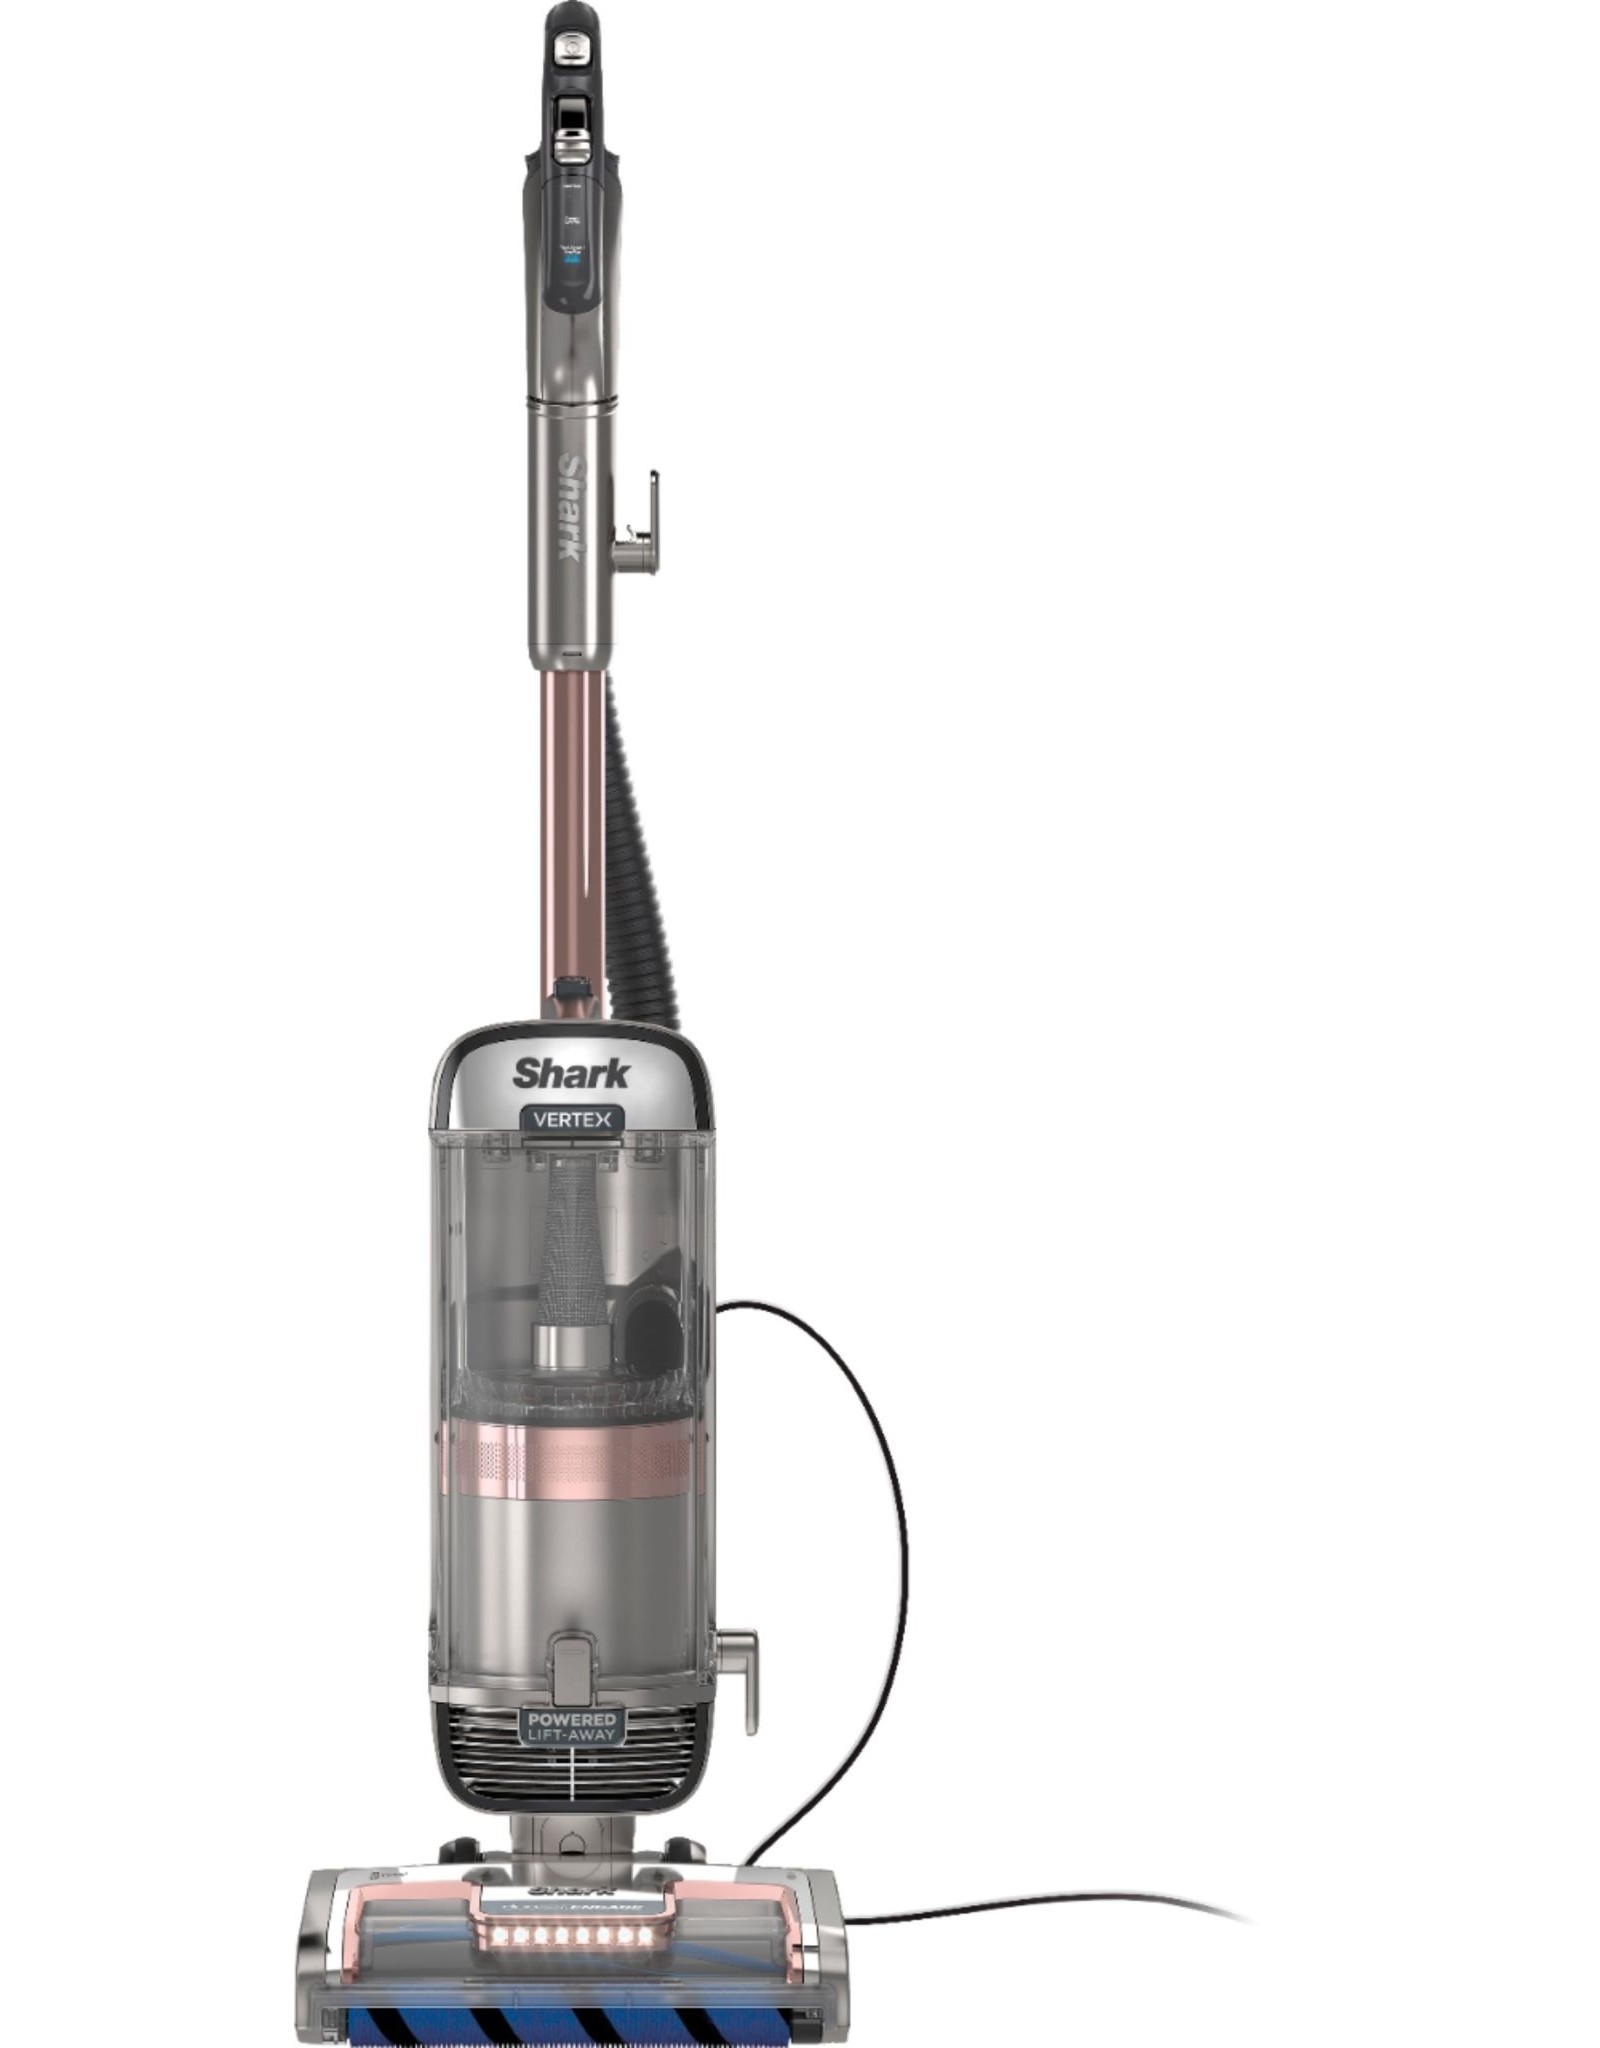 SHARK Shark Vertex DuoClean PowerFin Upright Vacuum with Powered Lift-Away and Self-Cleaning Brushroll - Rose Gold